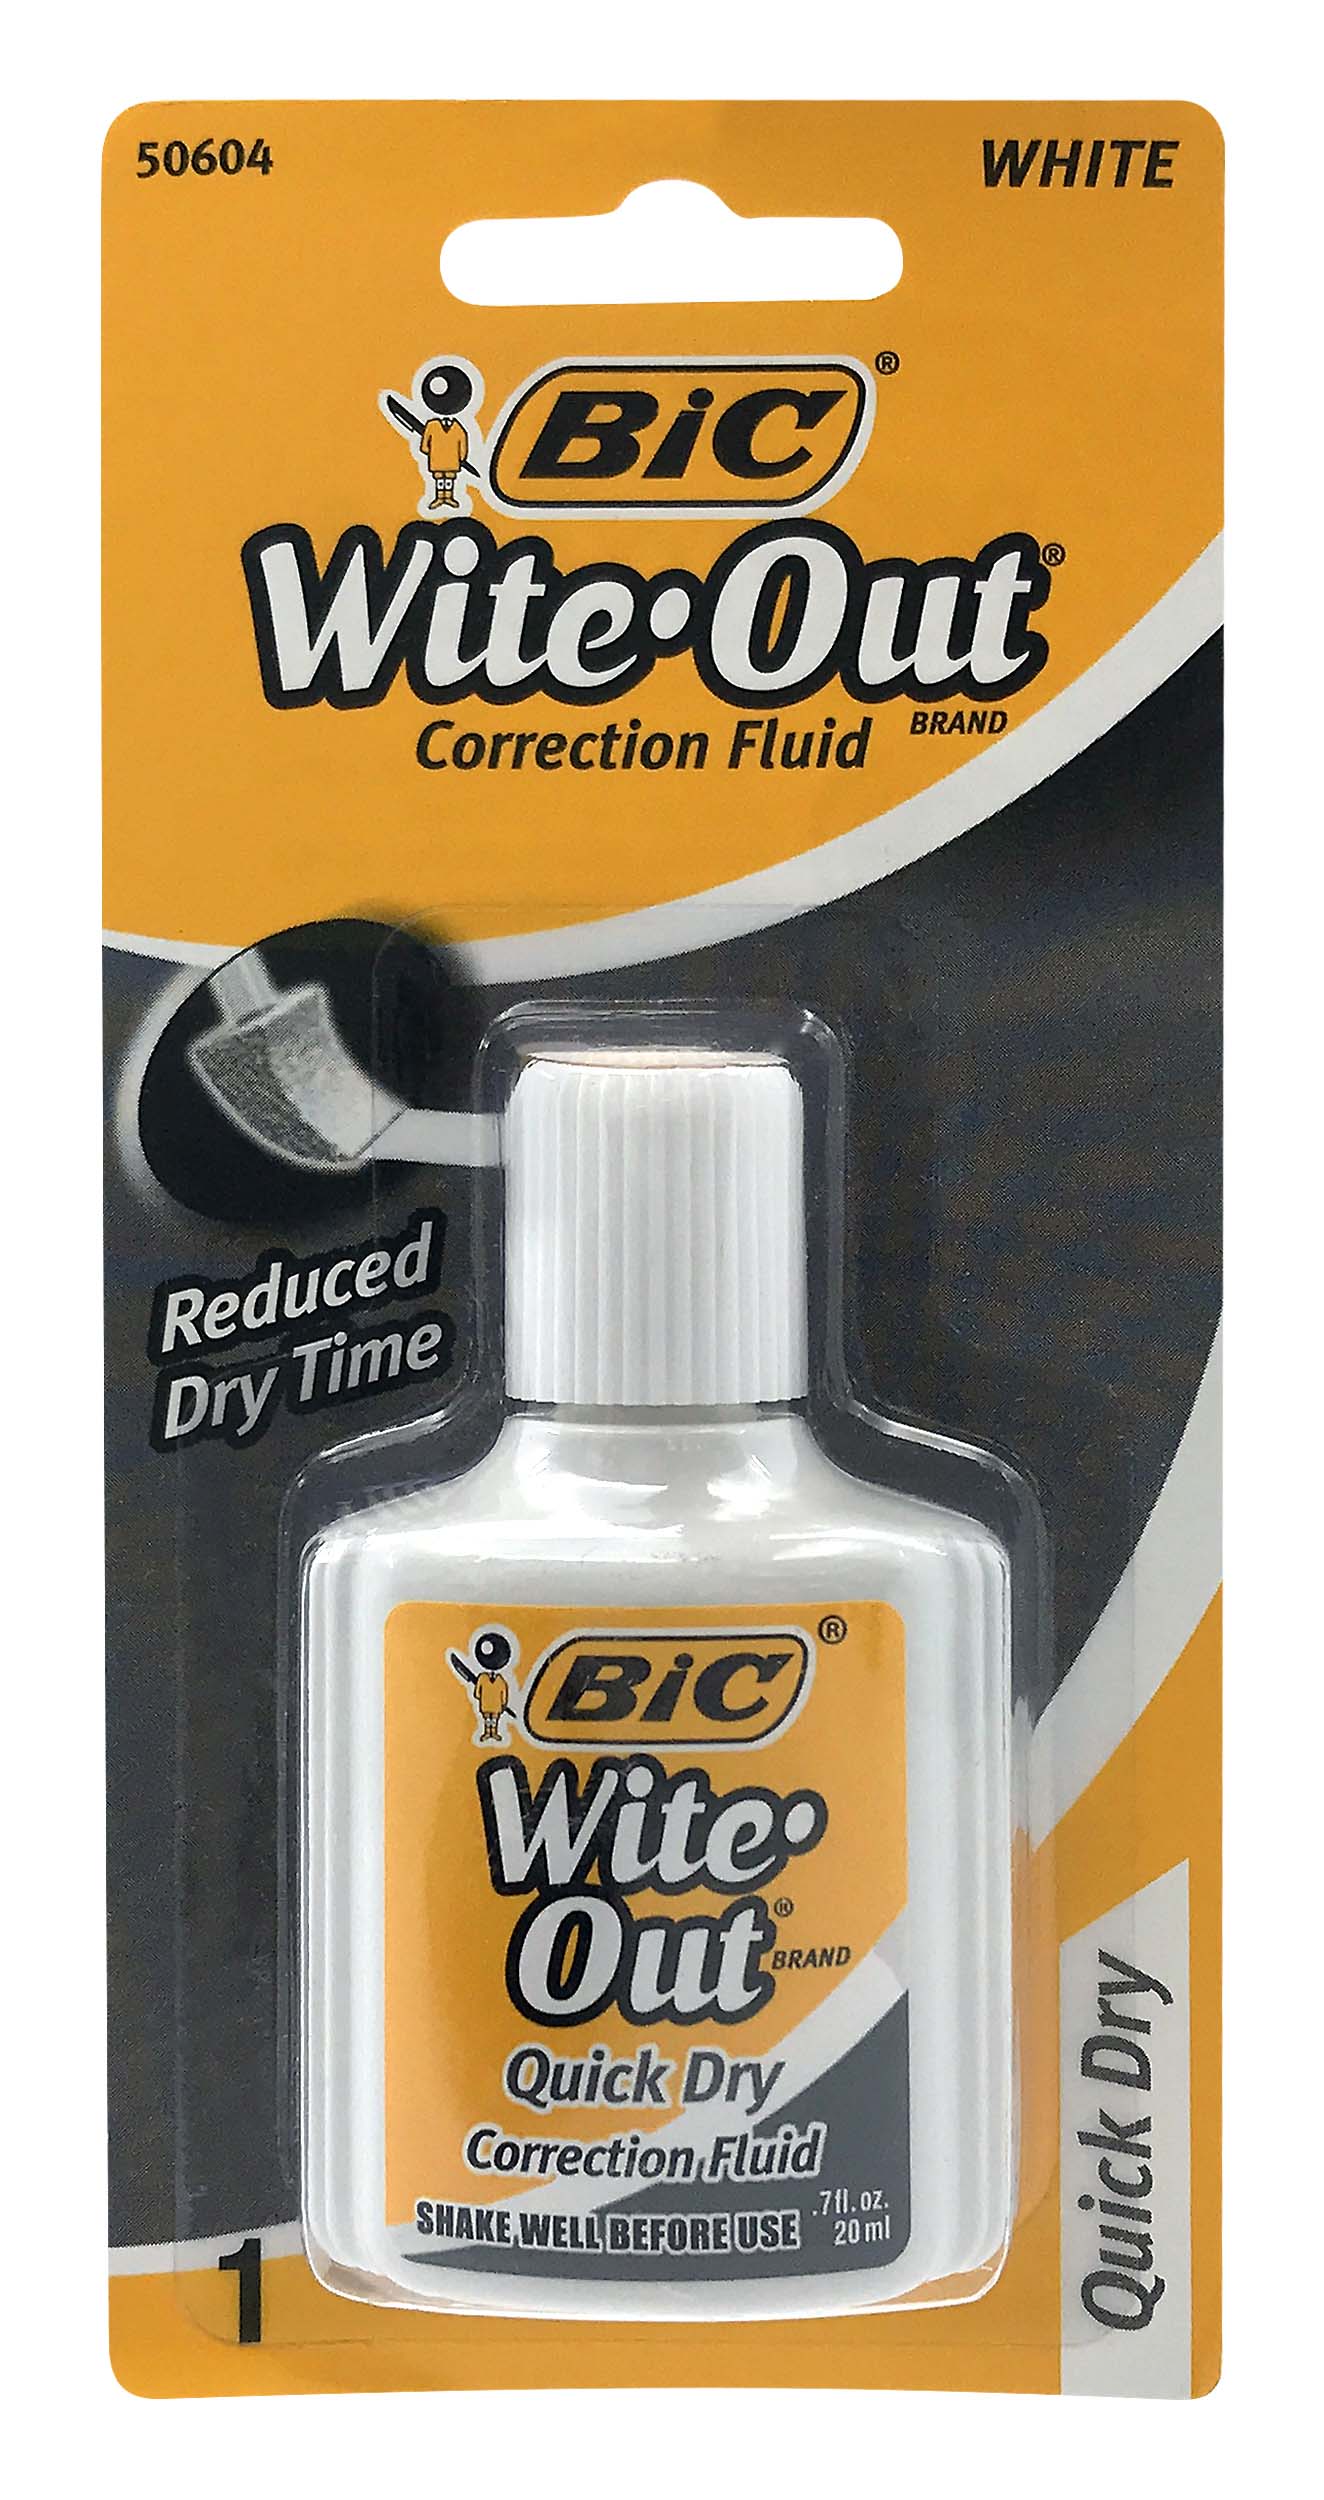 BIC QuickDry WiteOut Correction Fluid with Foam Brush